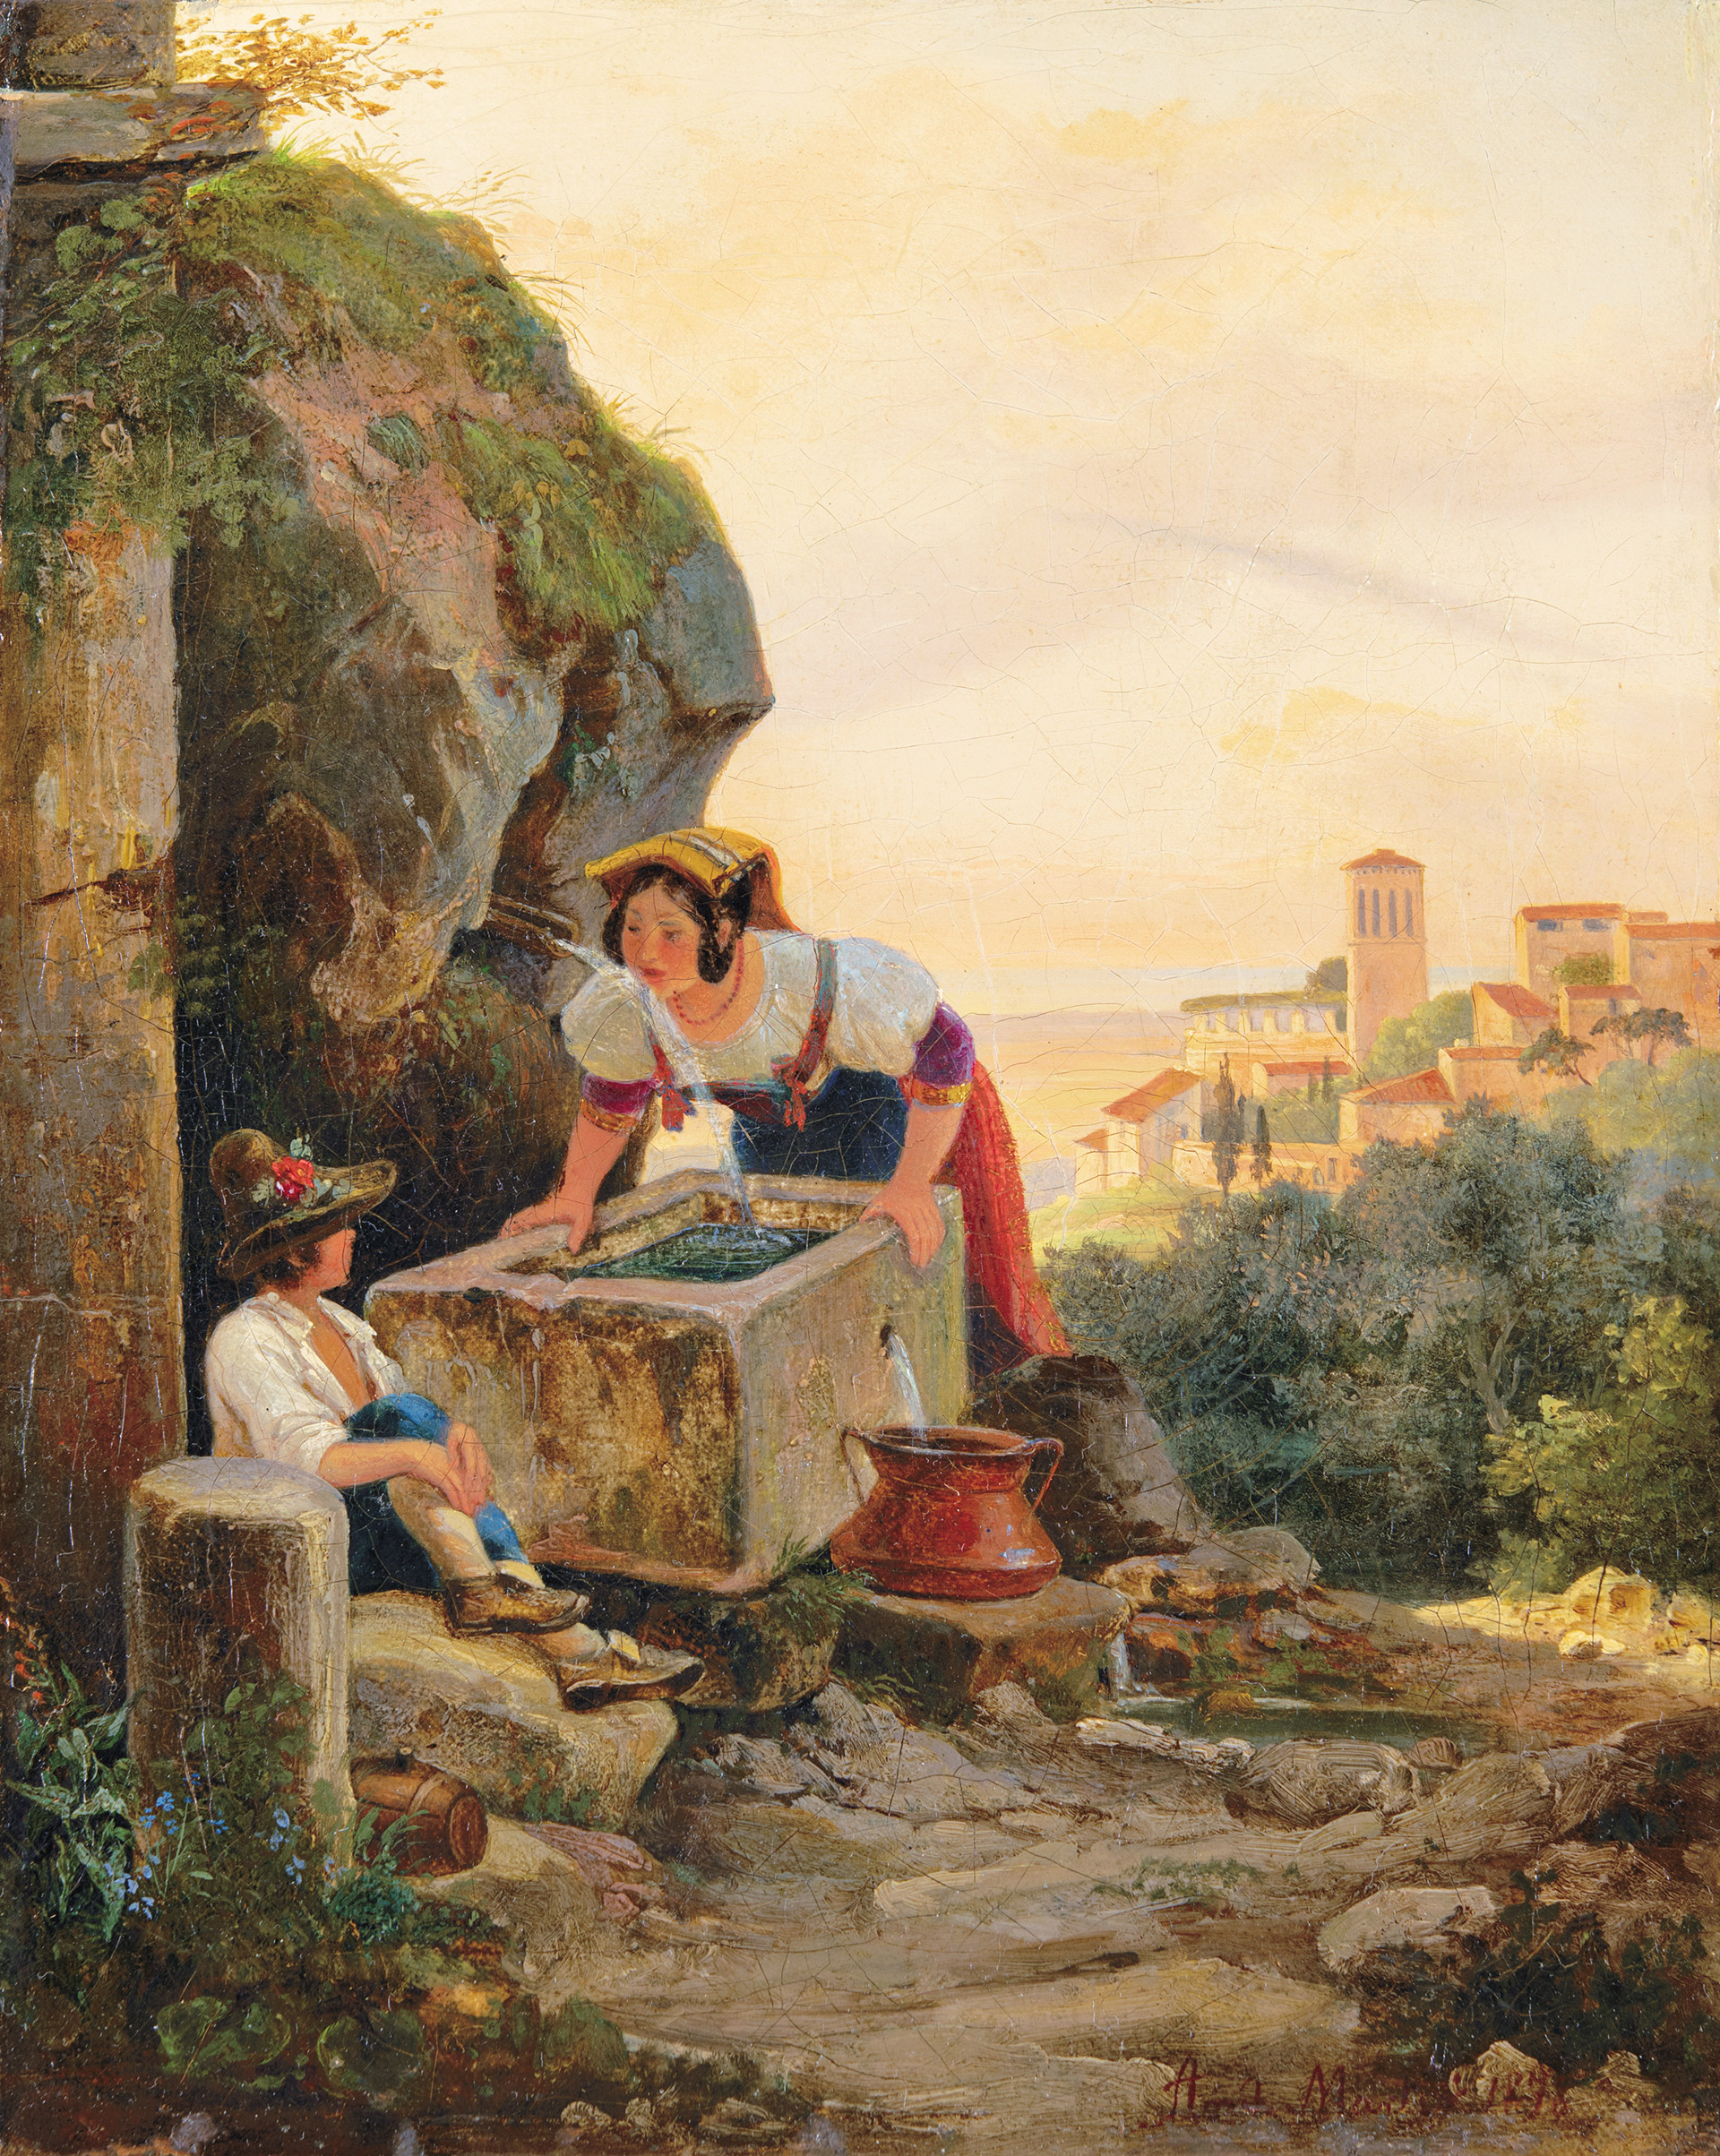 Markó András (1824-1895) The Water Carriers, 1878